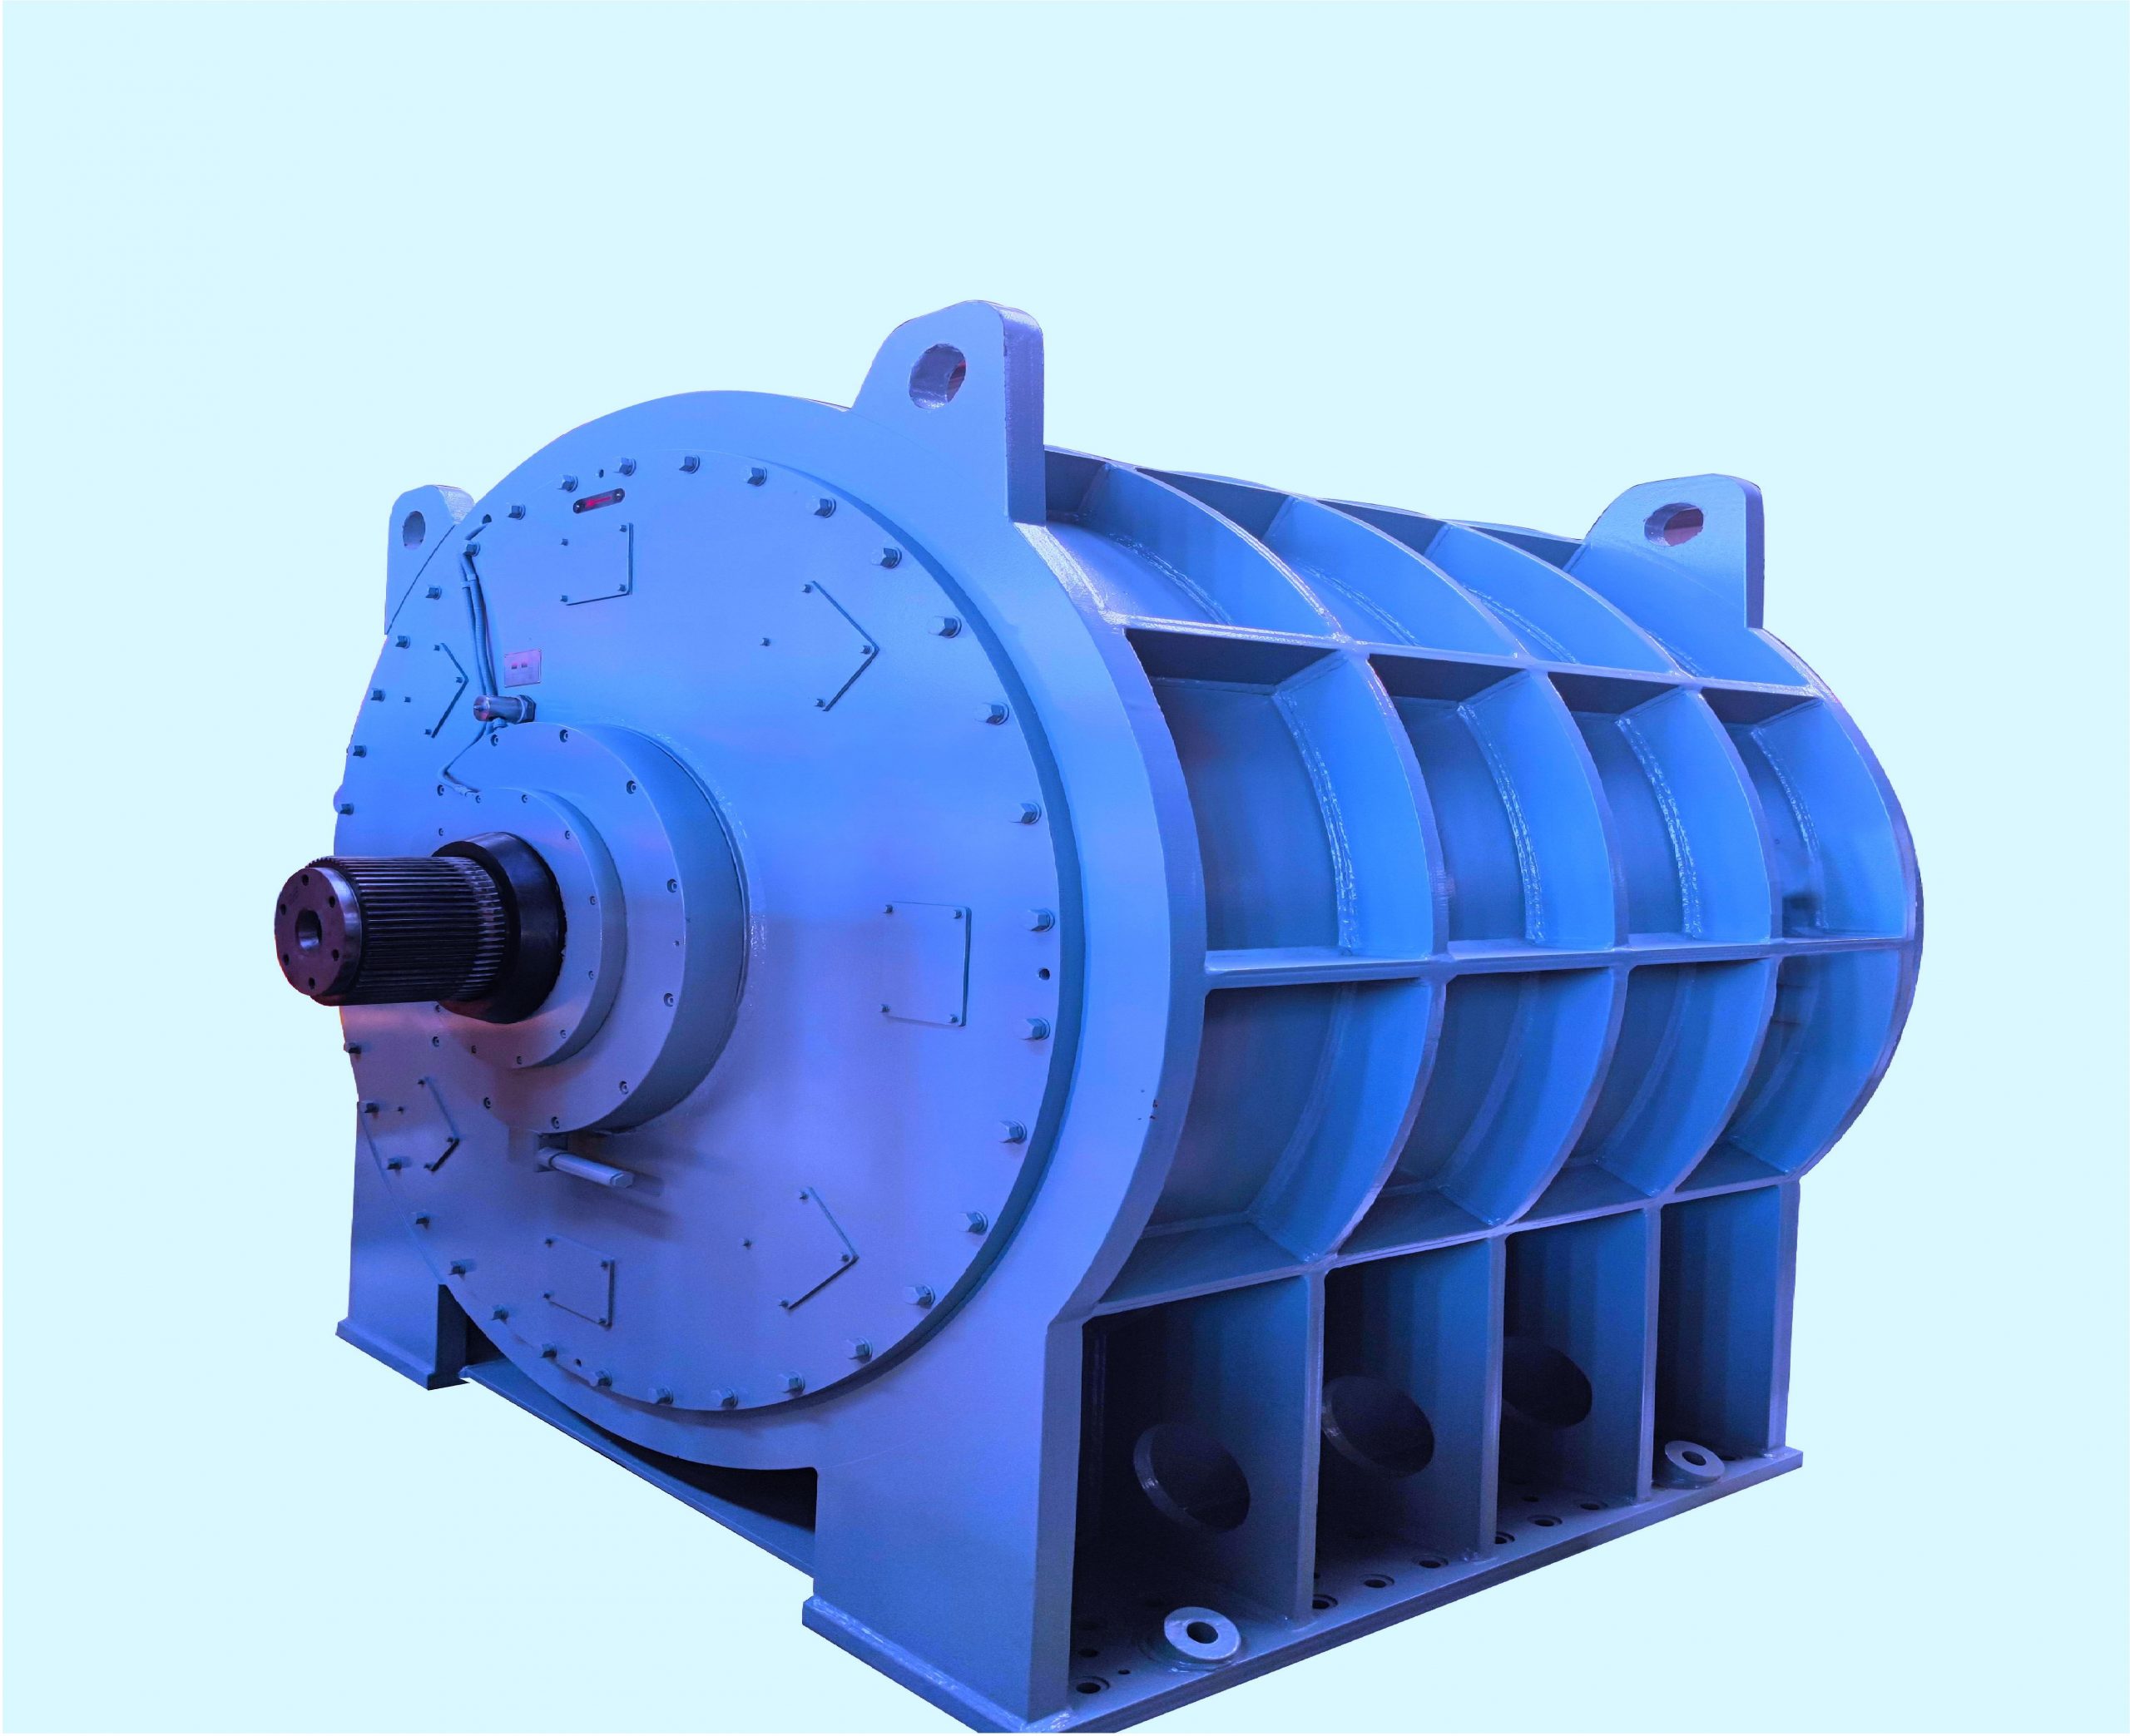 The plastic extruder used permanent magnet synchronous motors